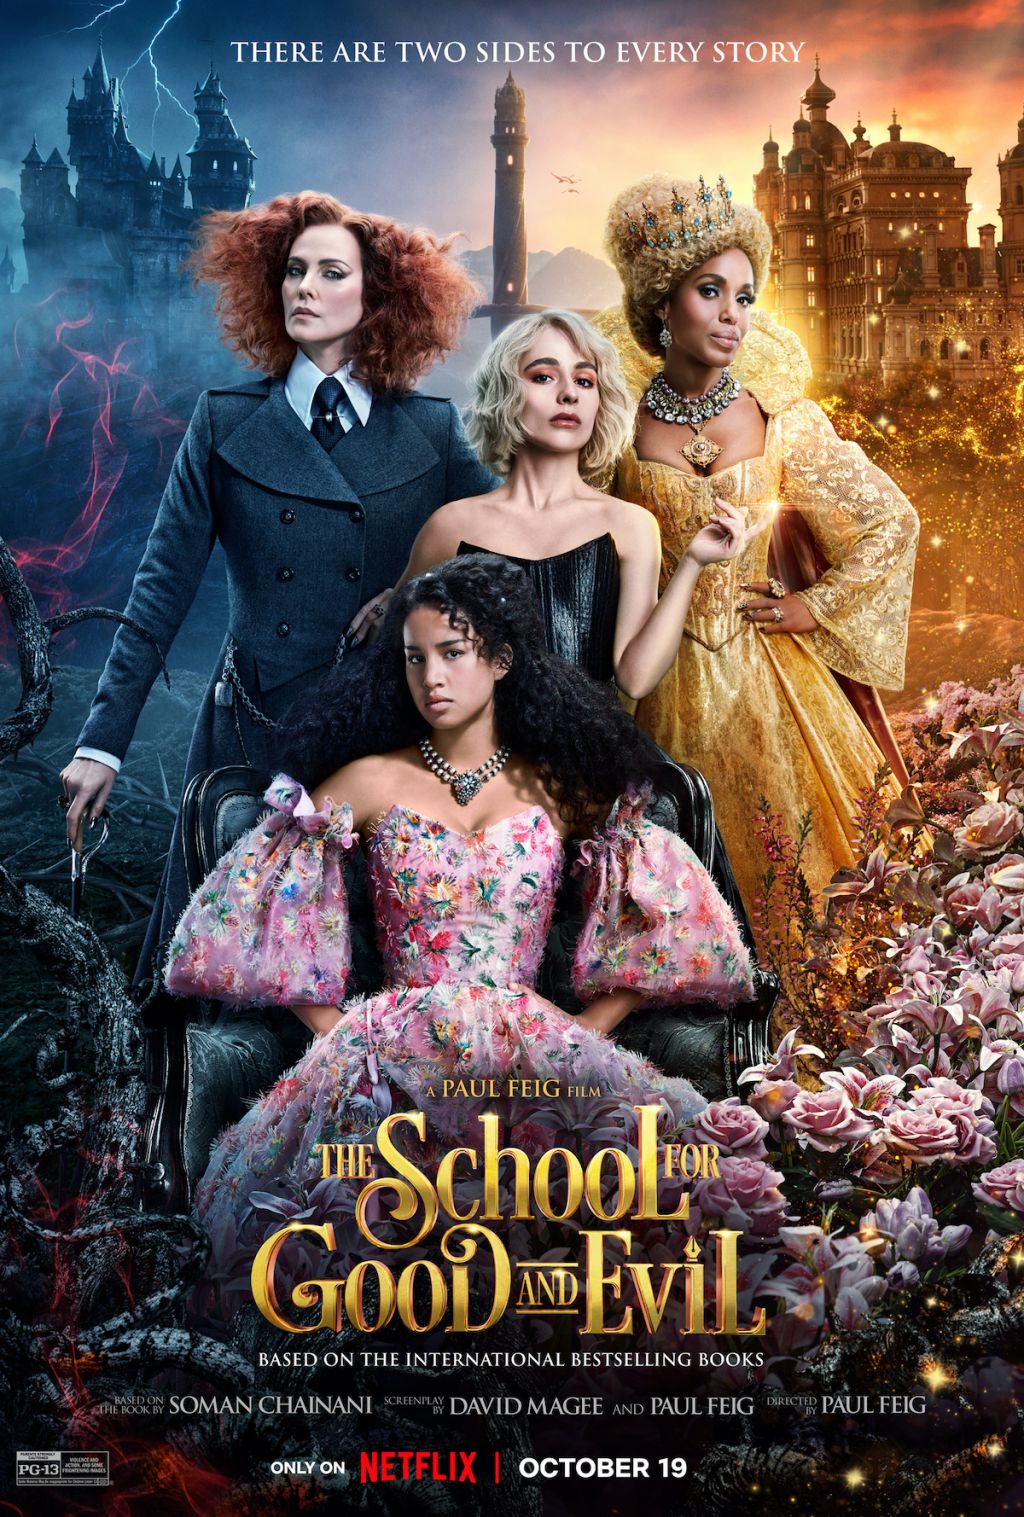 THE SCHOOL FOR GOOD AND EVIL key art and images